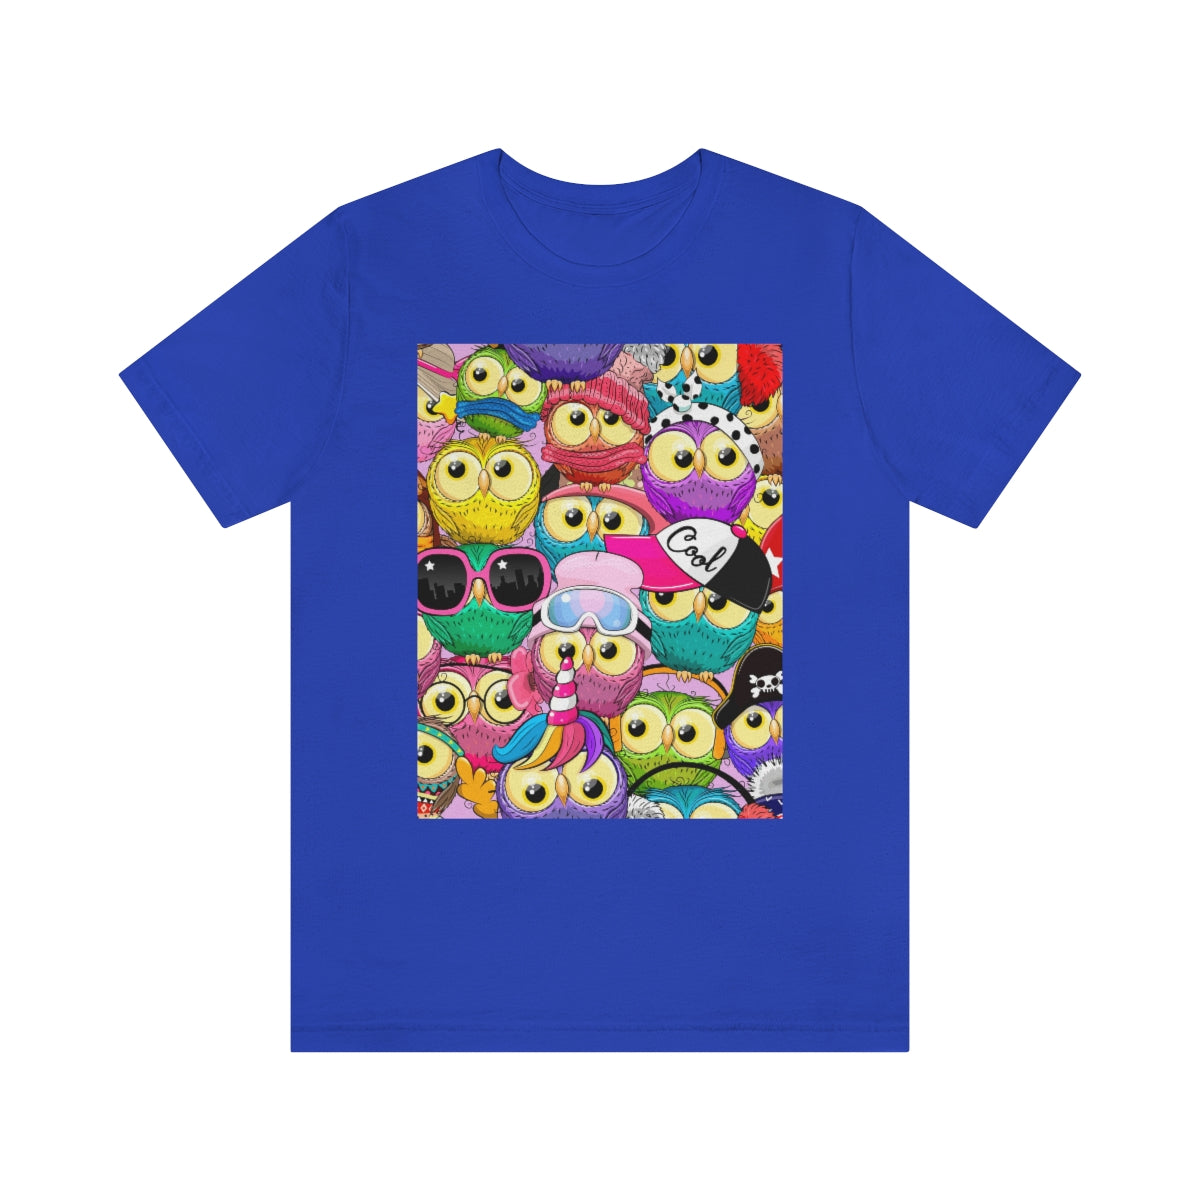 Unisex Jersey Short Sleeve Tee "Colorful Pattern with cute cartoon owls"